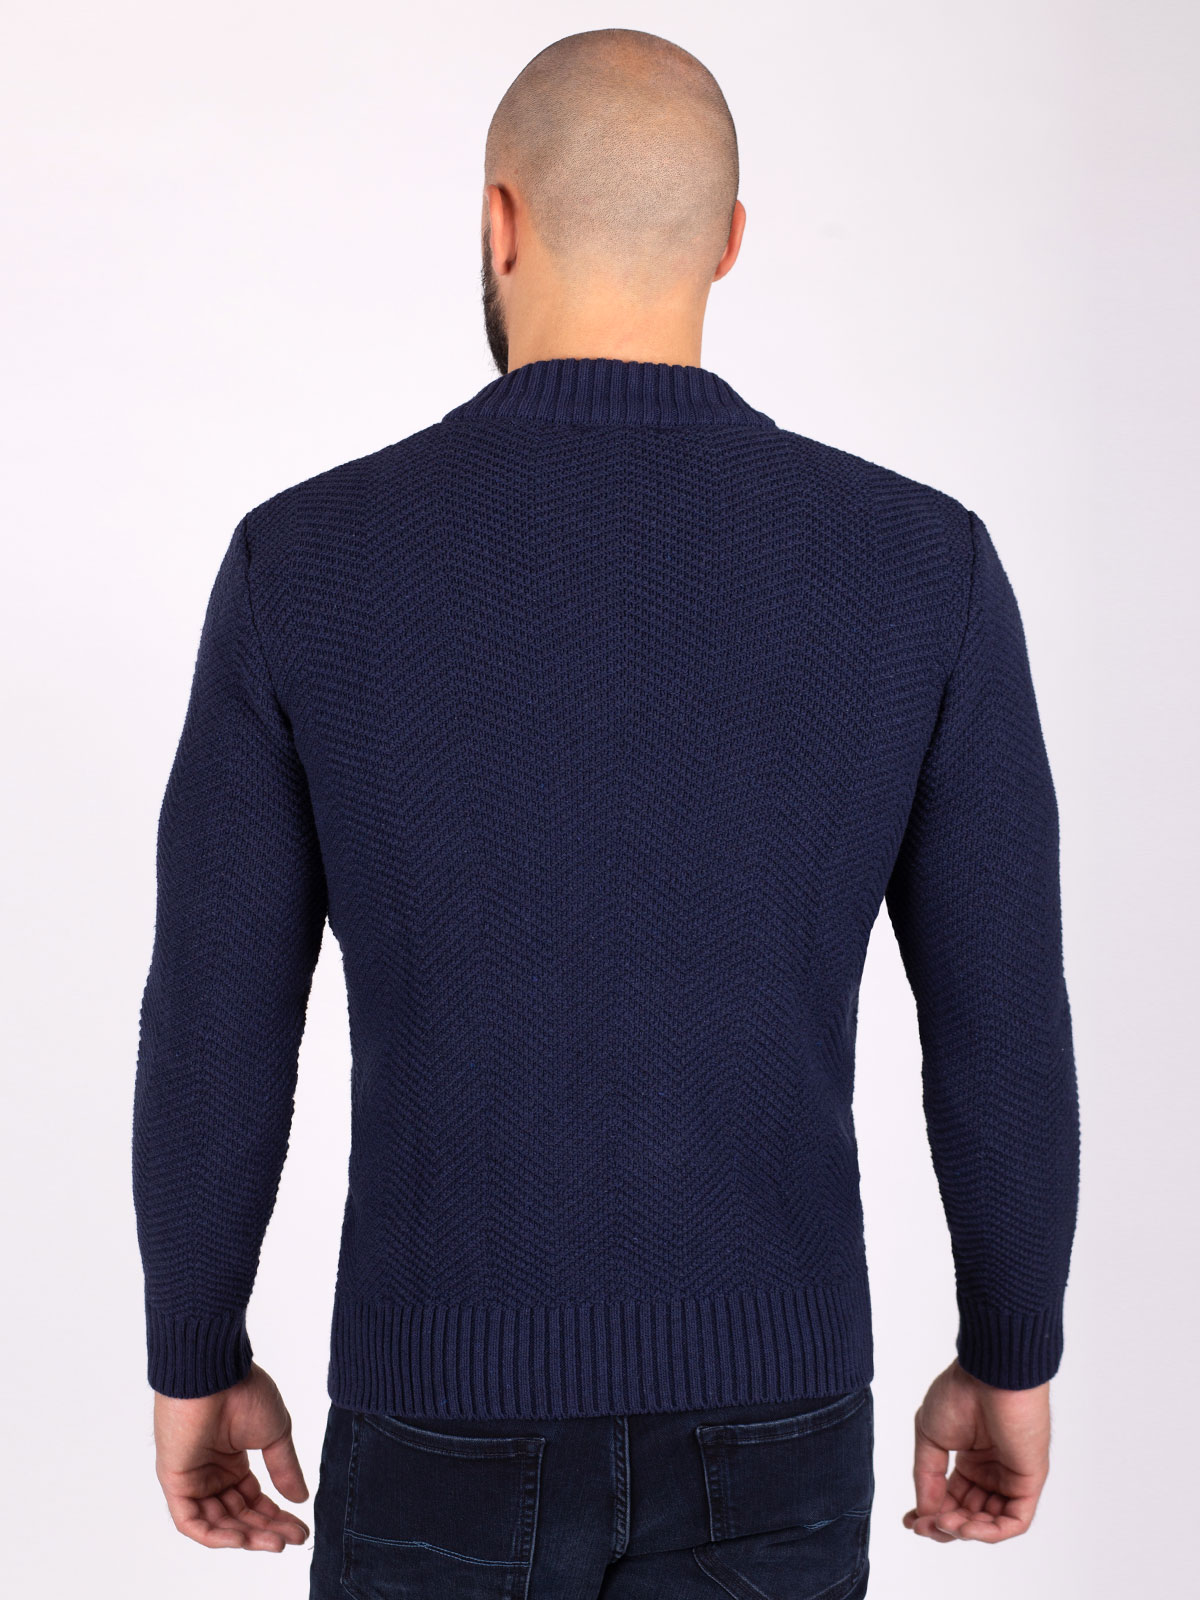 Cardigan with a large knit in dark blue - 28110 € 61.30 img4